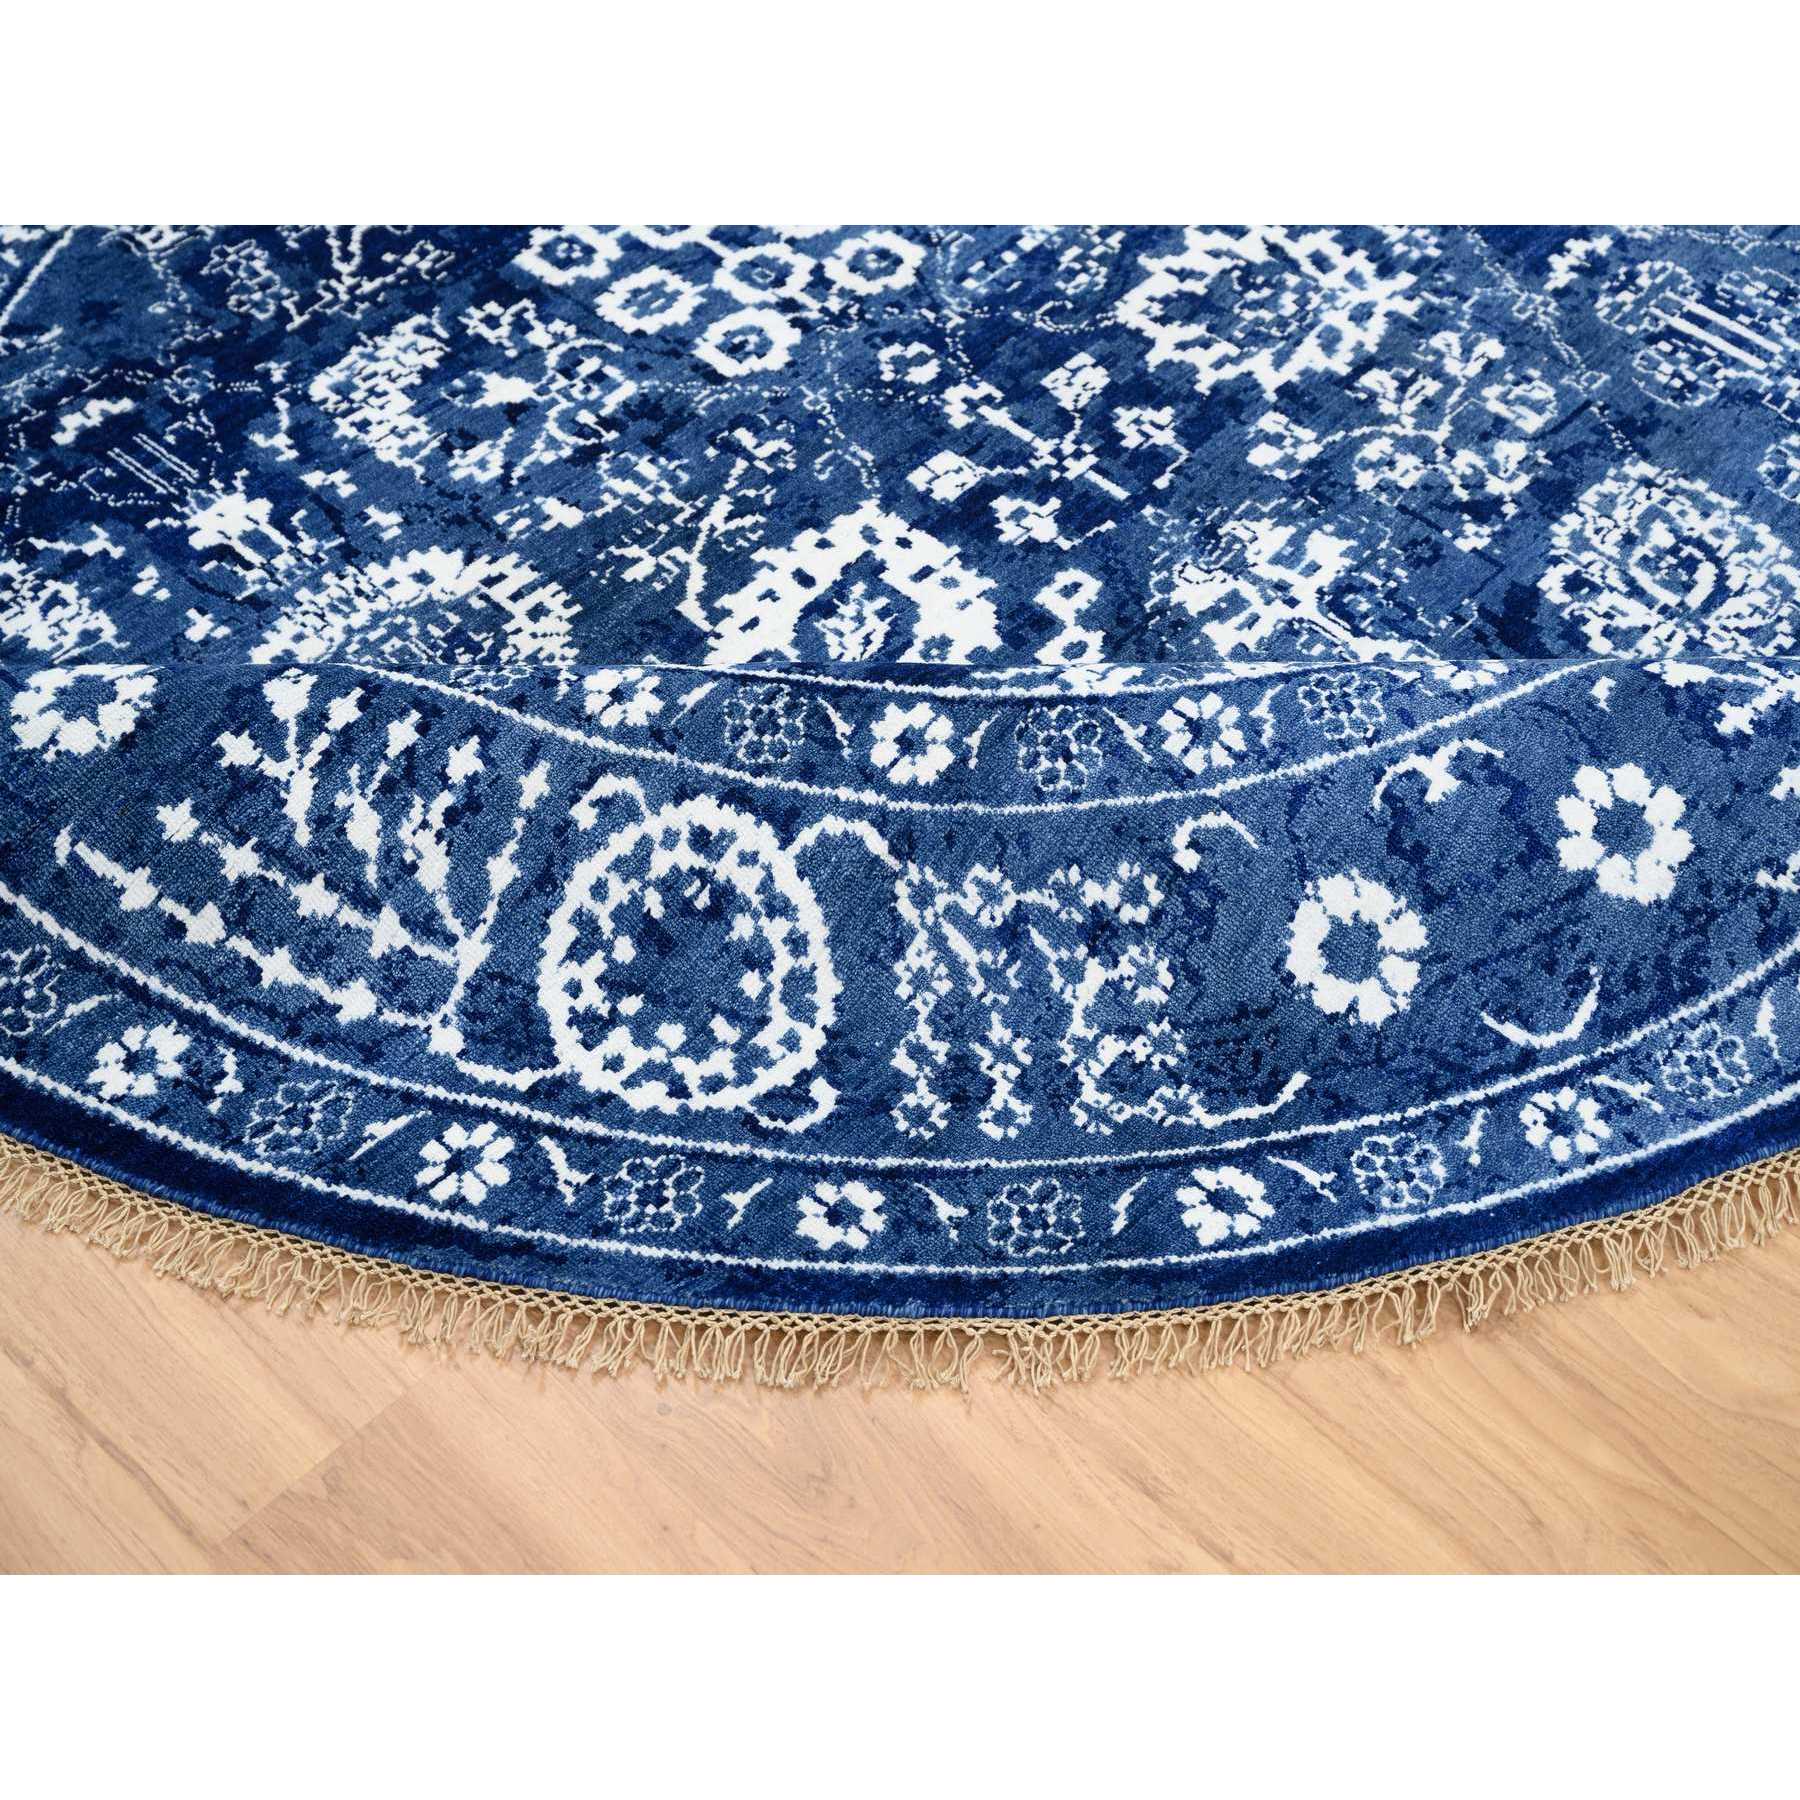 8'2"x8'2" Denim Blue, Wool and Silk Hand Woven, Tabriz with All Over Motifs Tone on Tone, Round Oriental Rug 